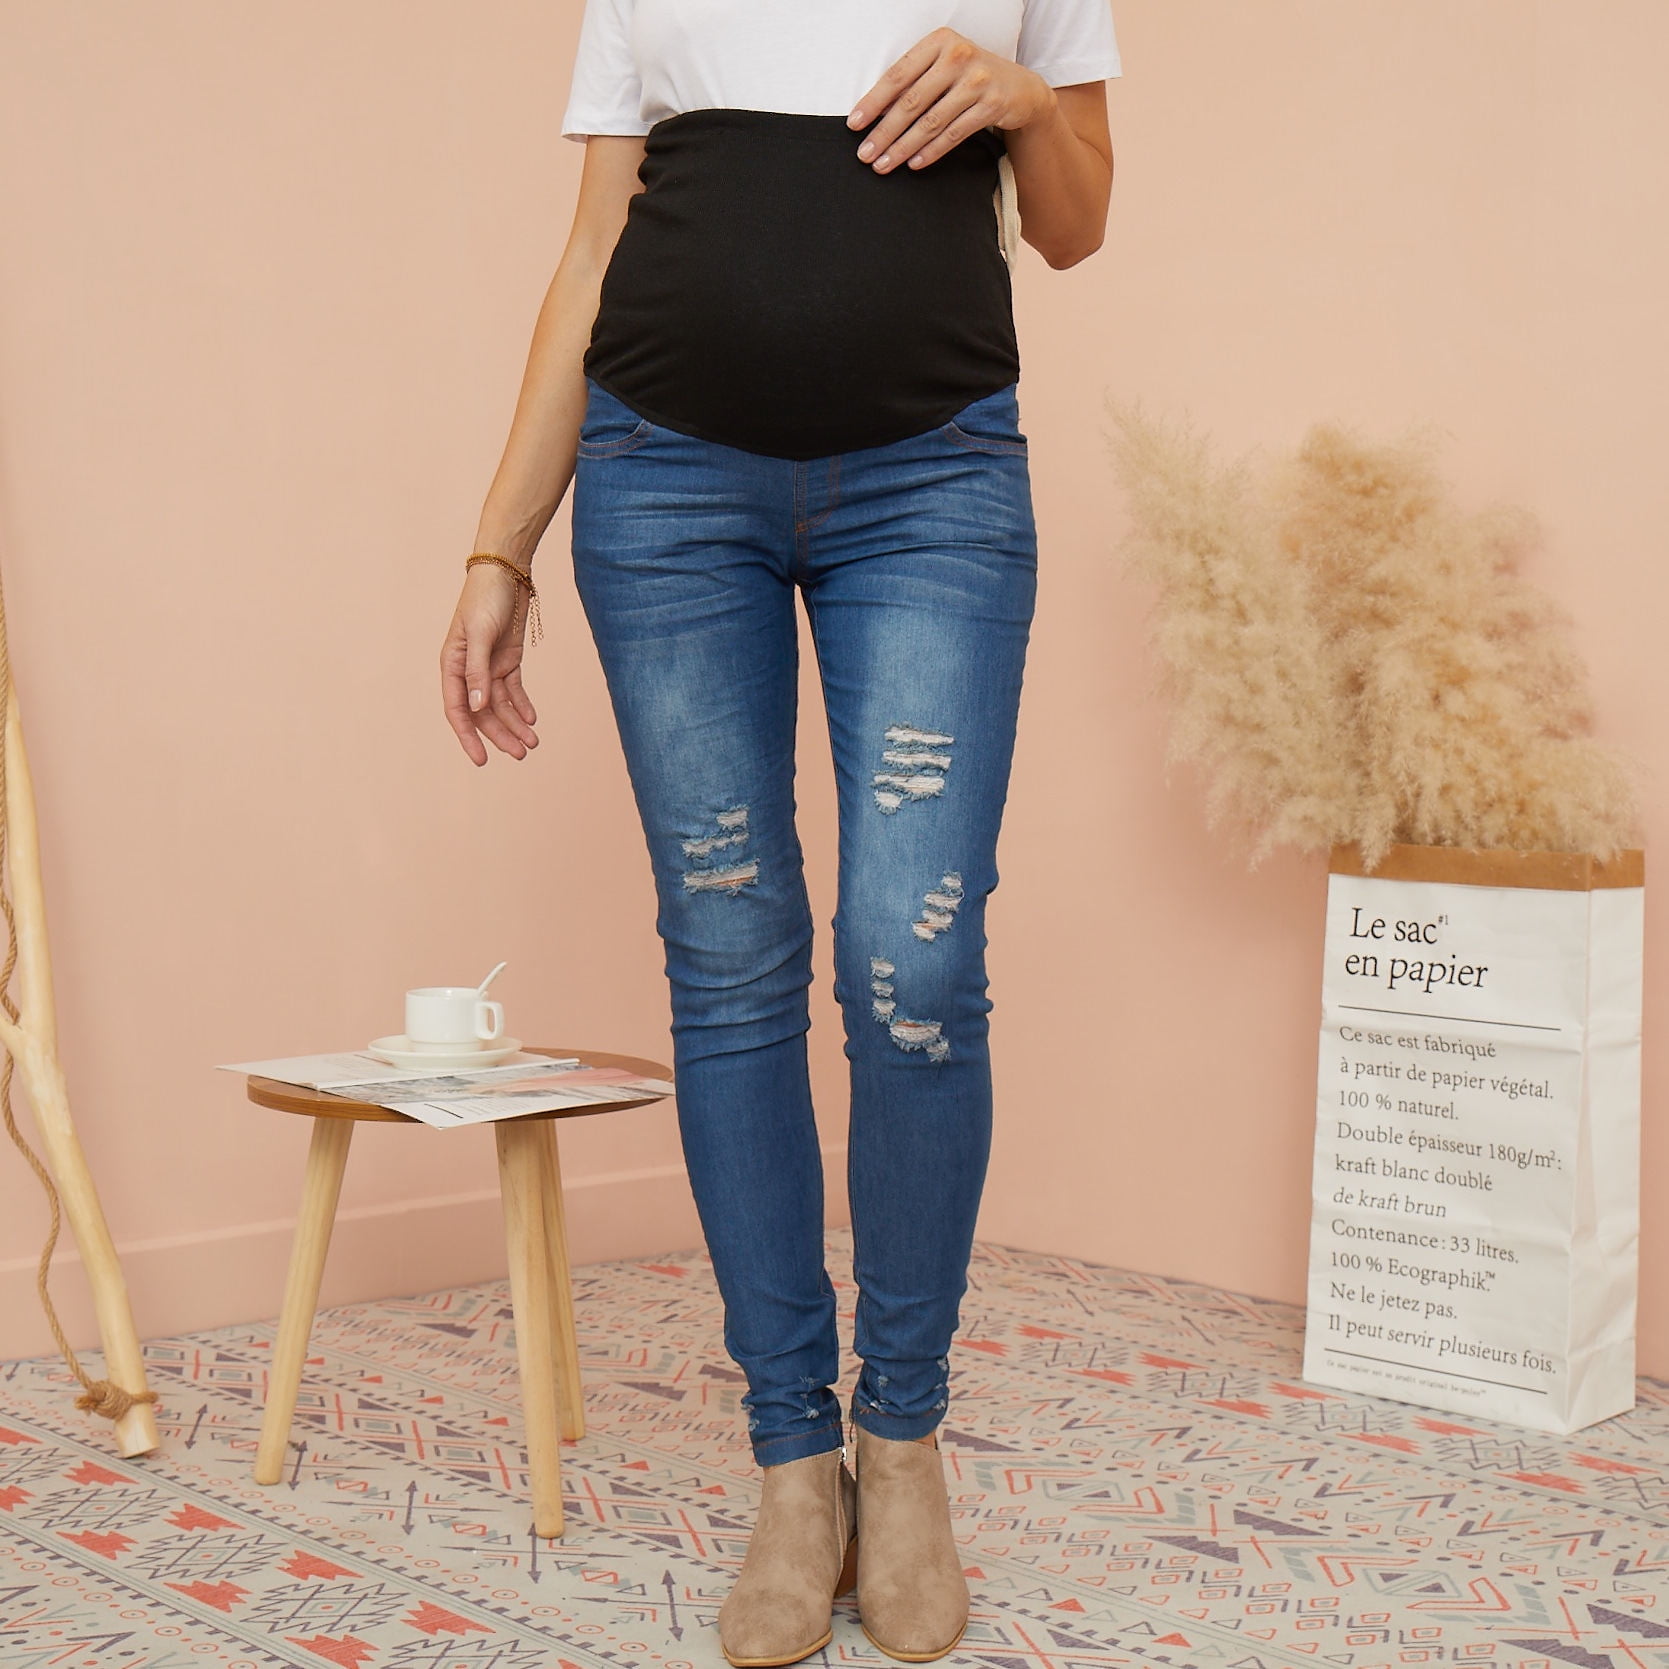 Foucome Maternity High Waist Skinny Stretch Ripped Jeans Destroyed Denim Pants 